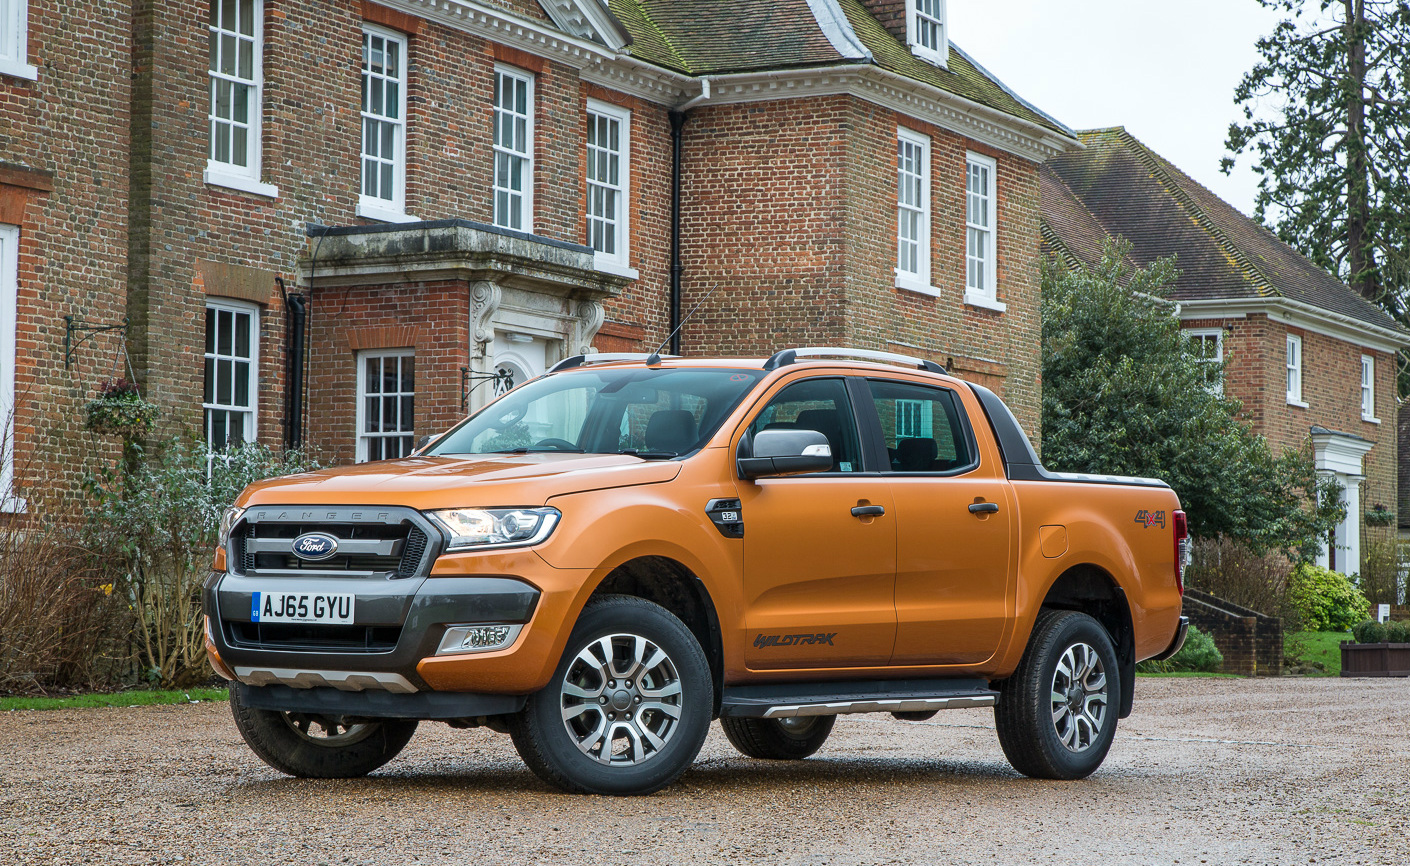 Pick up trucks: which are the best for towing, fuel economy and families? Includes Isuzu D-Max, Ford Ranger and Nissan Navara